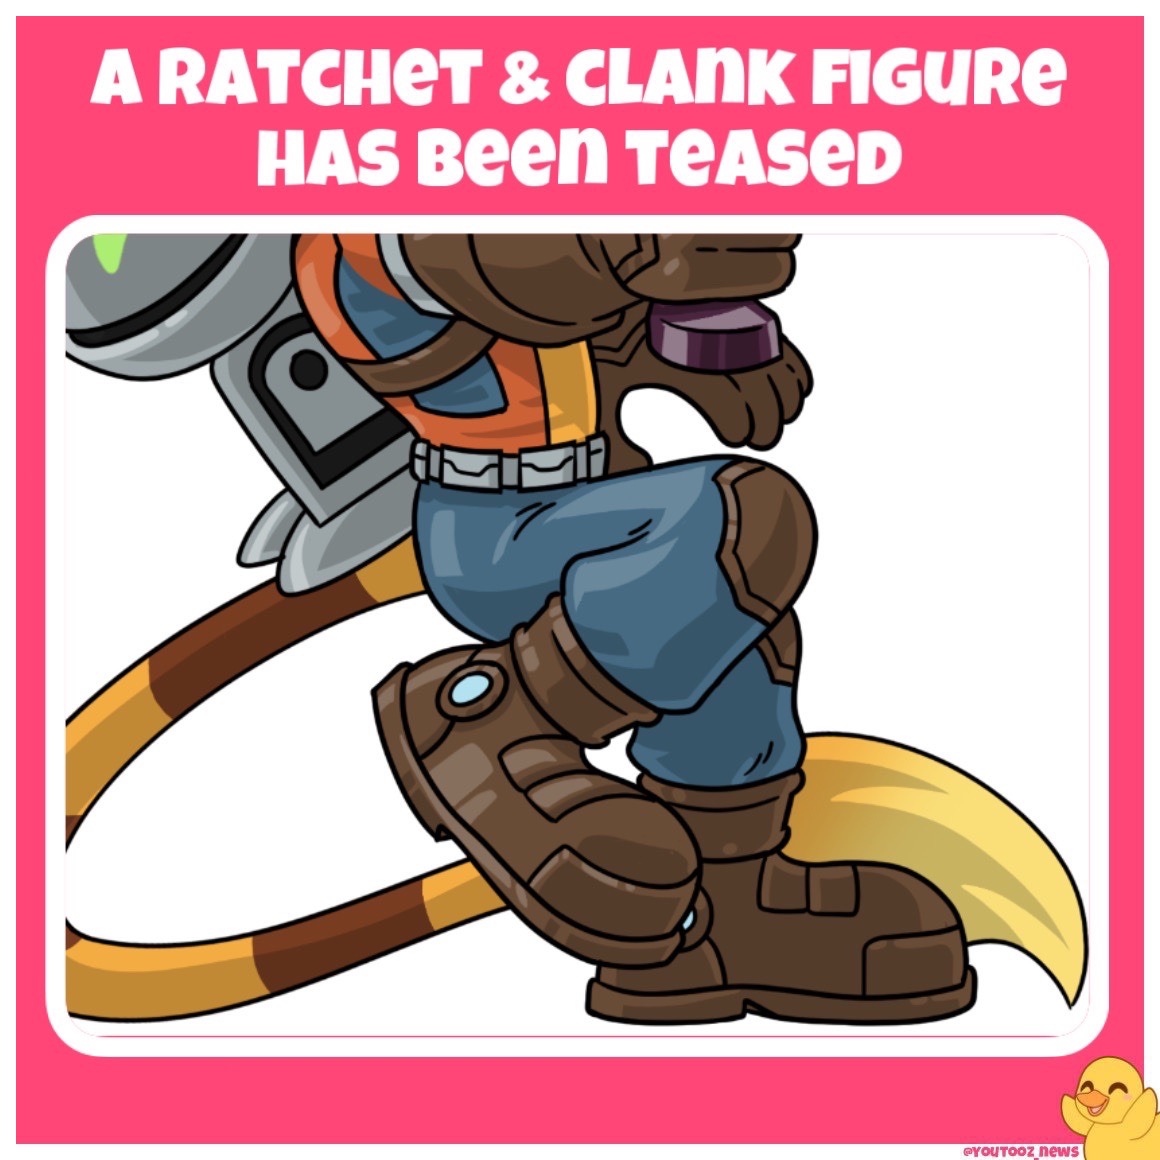 A new intriguing Ratchet & Clank statue has been teased by youtooz.